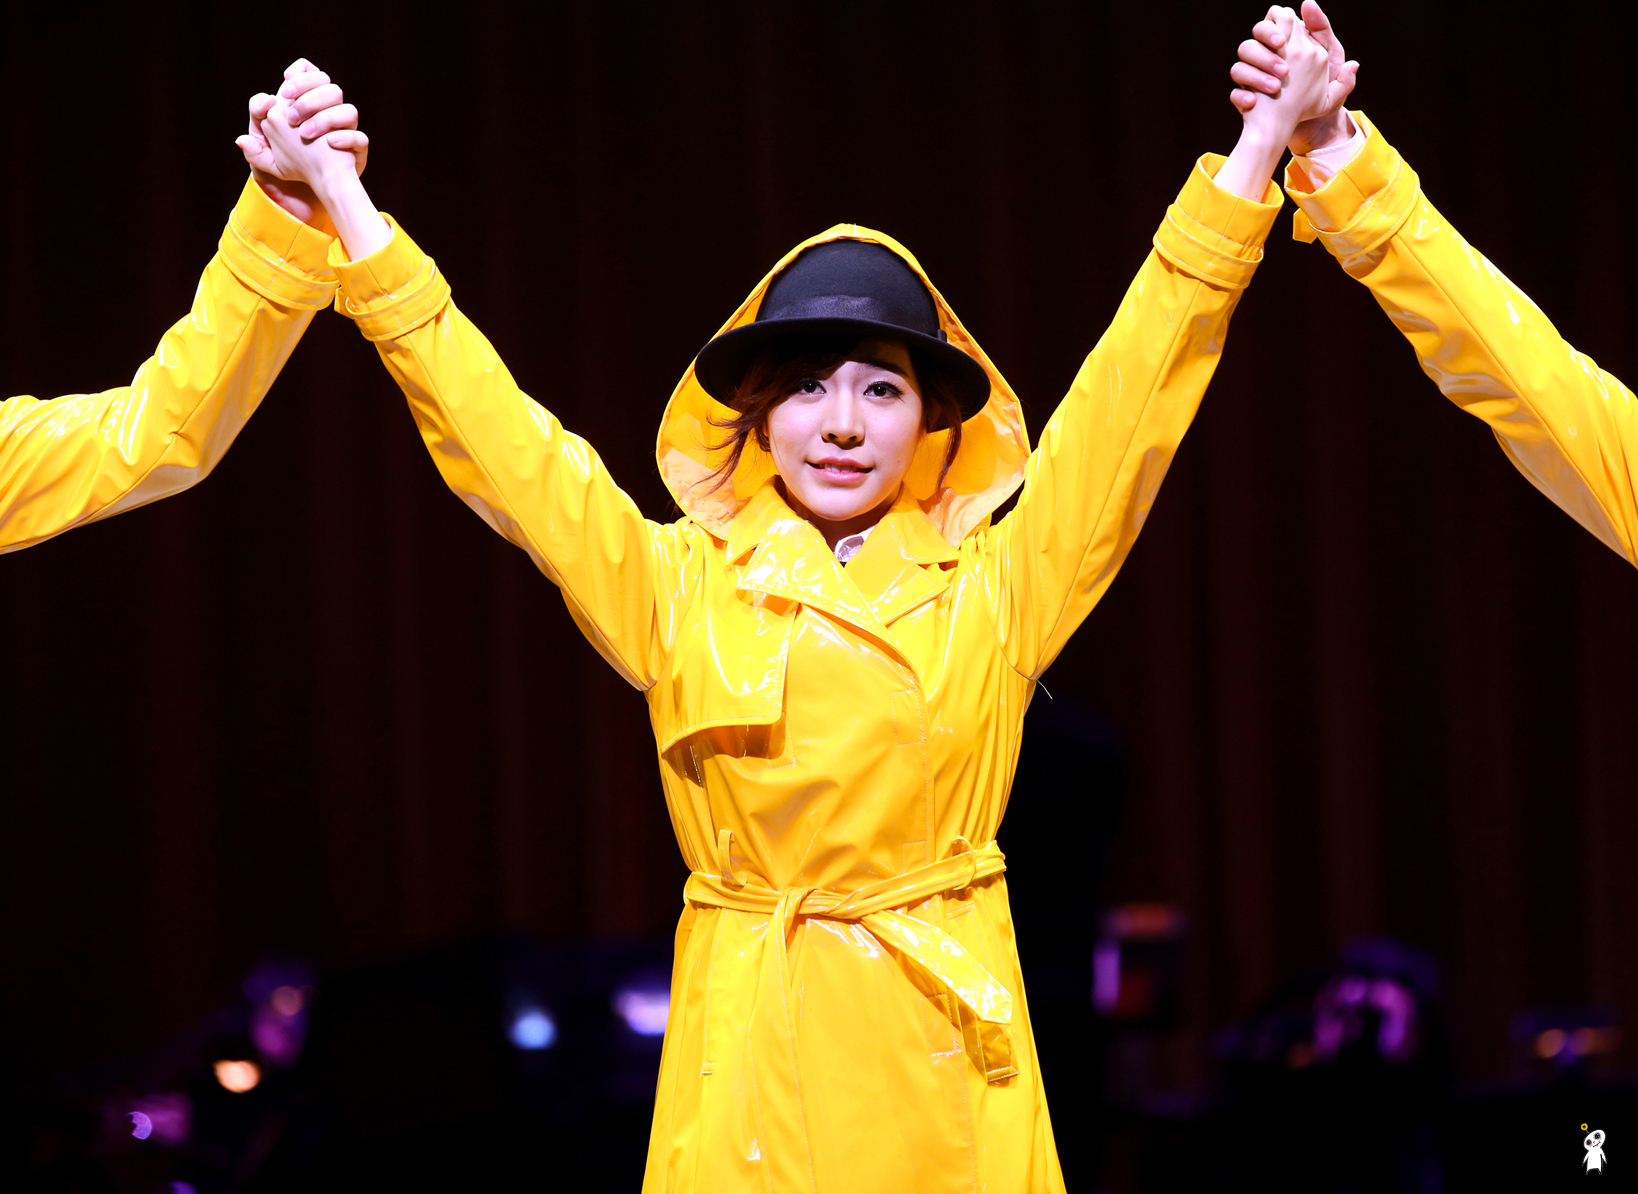 [OTHER][29-04-2014]Sunny sẽ tham gia vở nhạc kịch "SINGIN' IN THE RAIN" - Page 6 22160A3953DAEFB00F6165